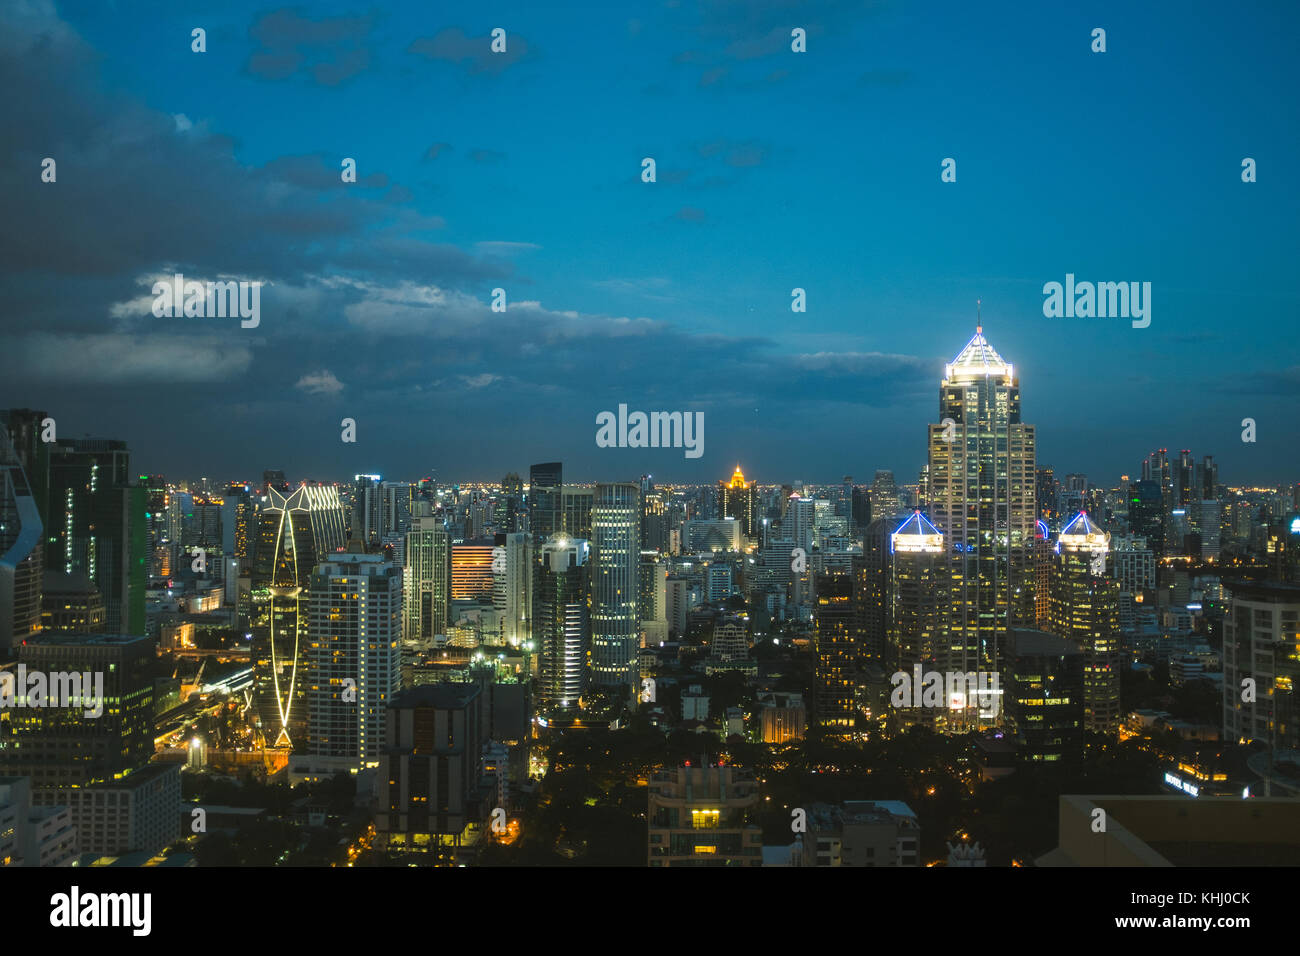 A view of Bangkok city in Thailand at night time. Stock Photo